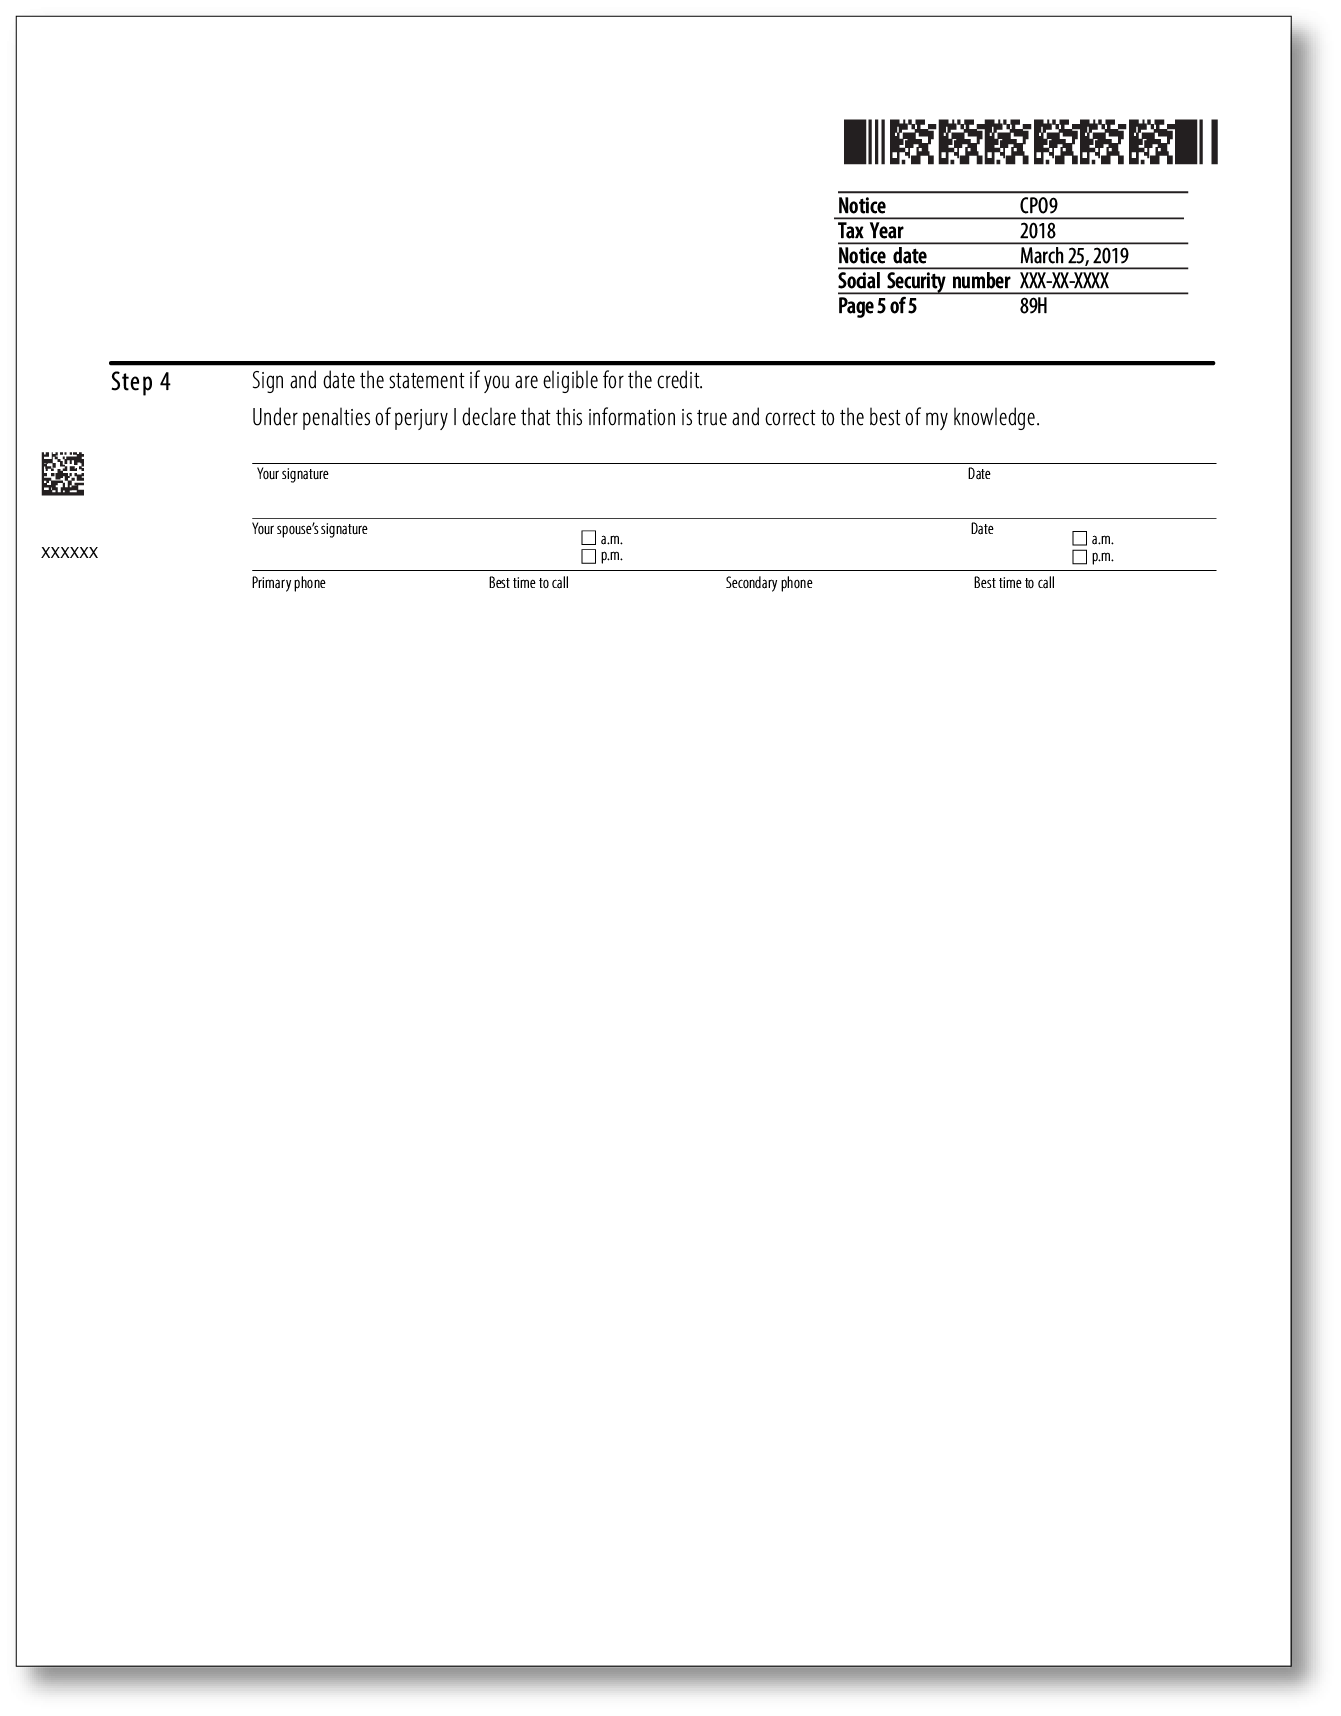 IRS Audit Letter CP09 – Sample 1